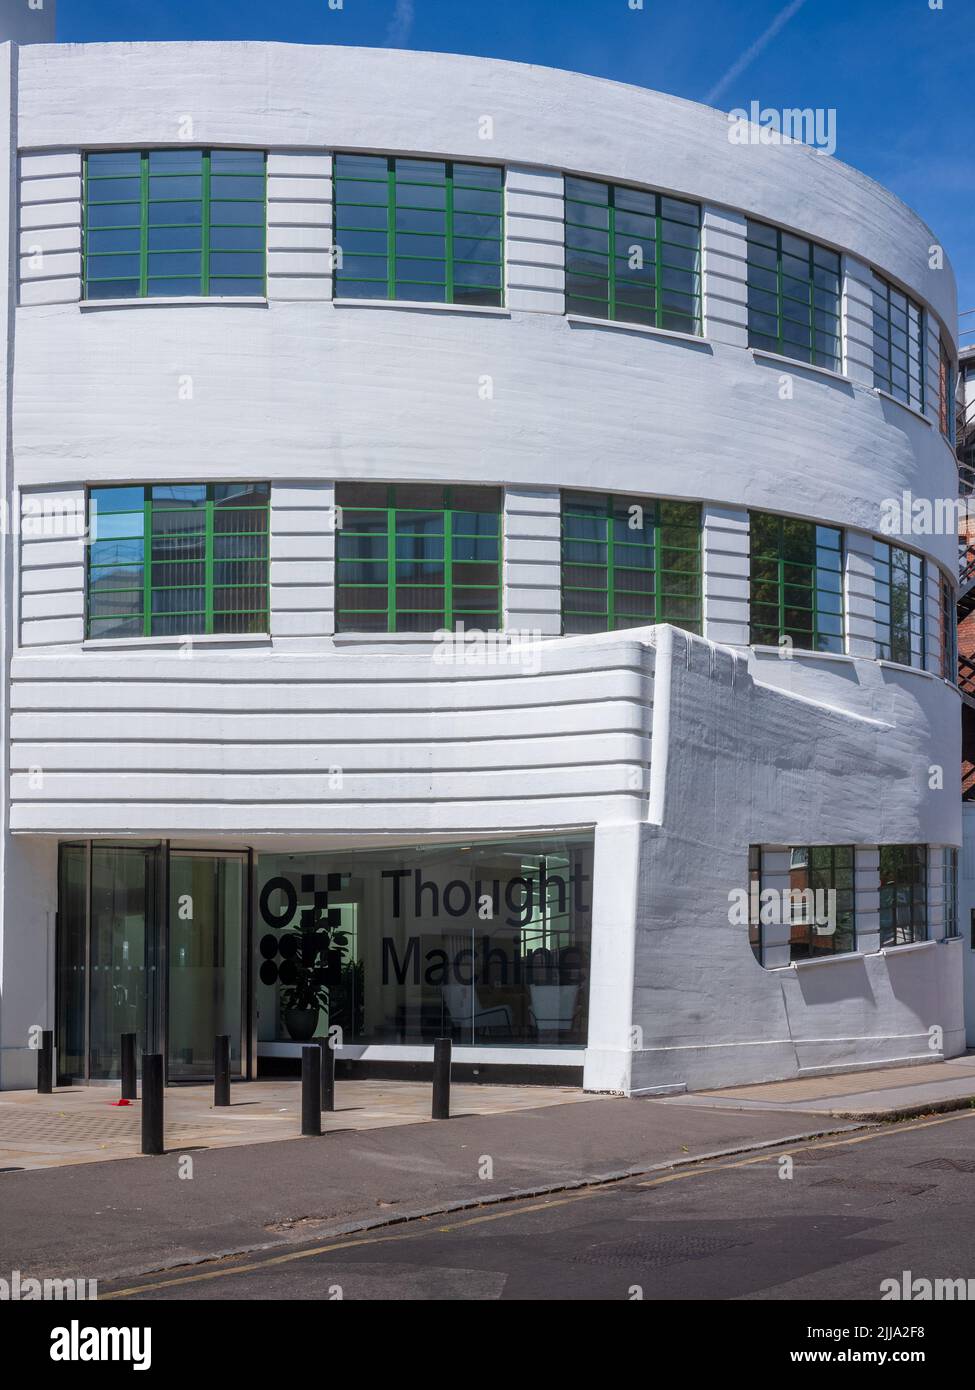 Thought Machine HQ London Herbrand St - Thought Machine is a fintech company that builds cloud-based platforms for the banking industry. Founded 2014. Stock Photo